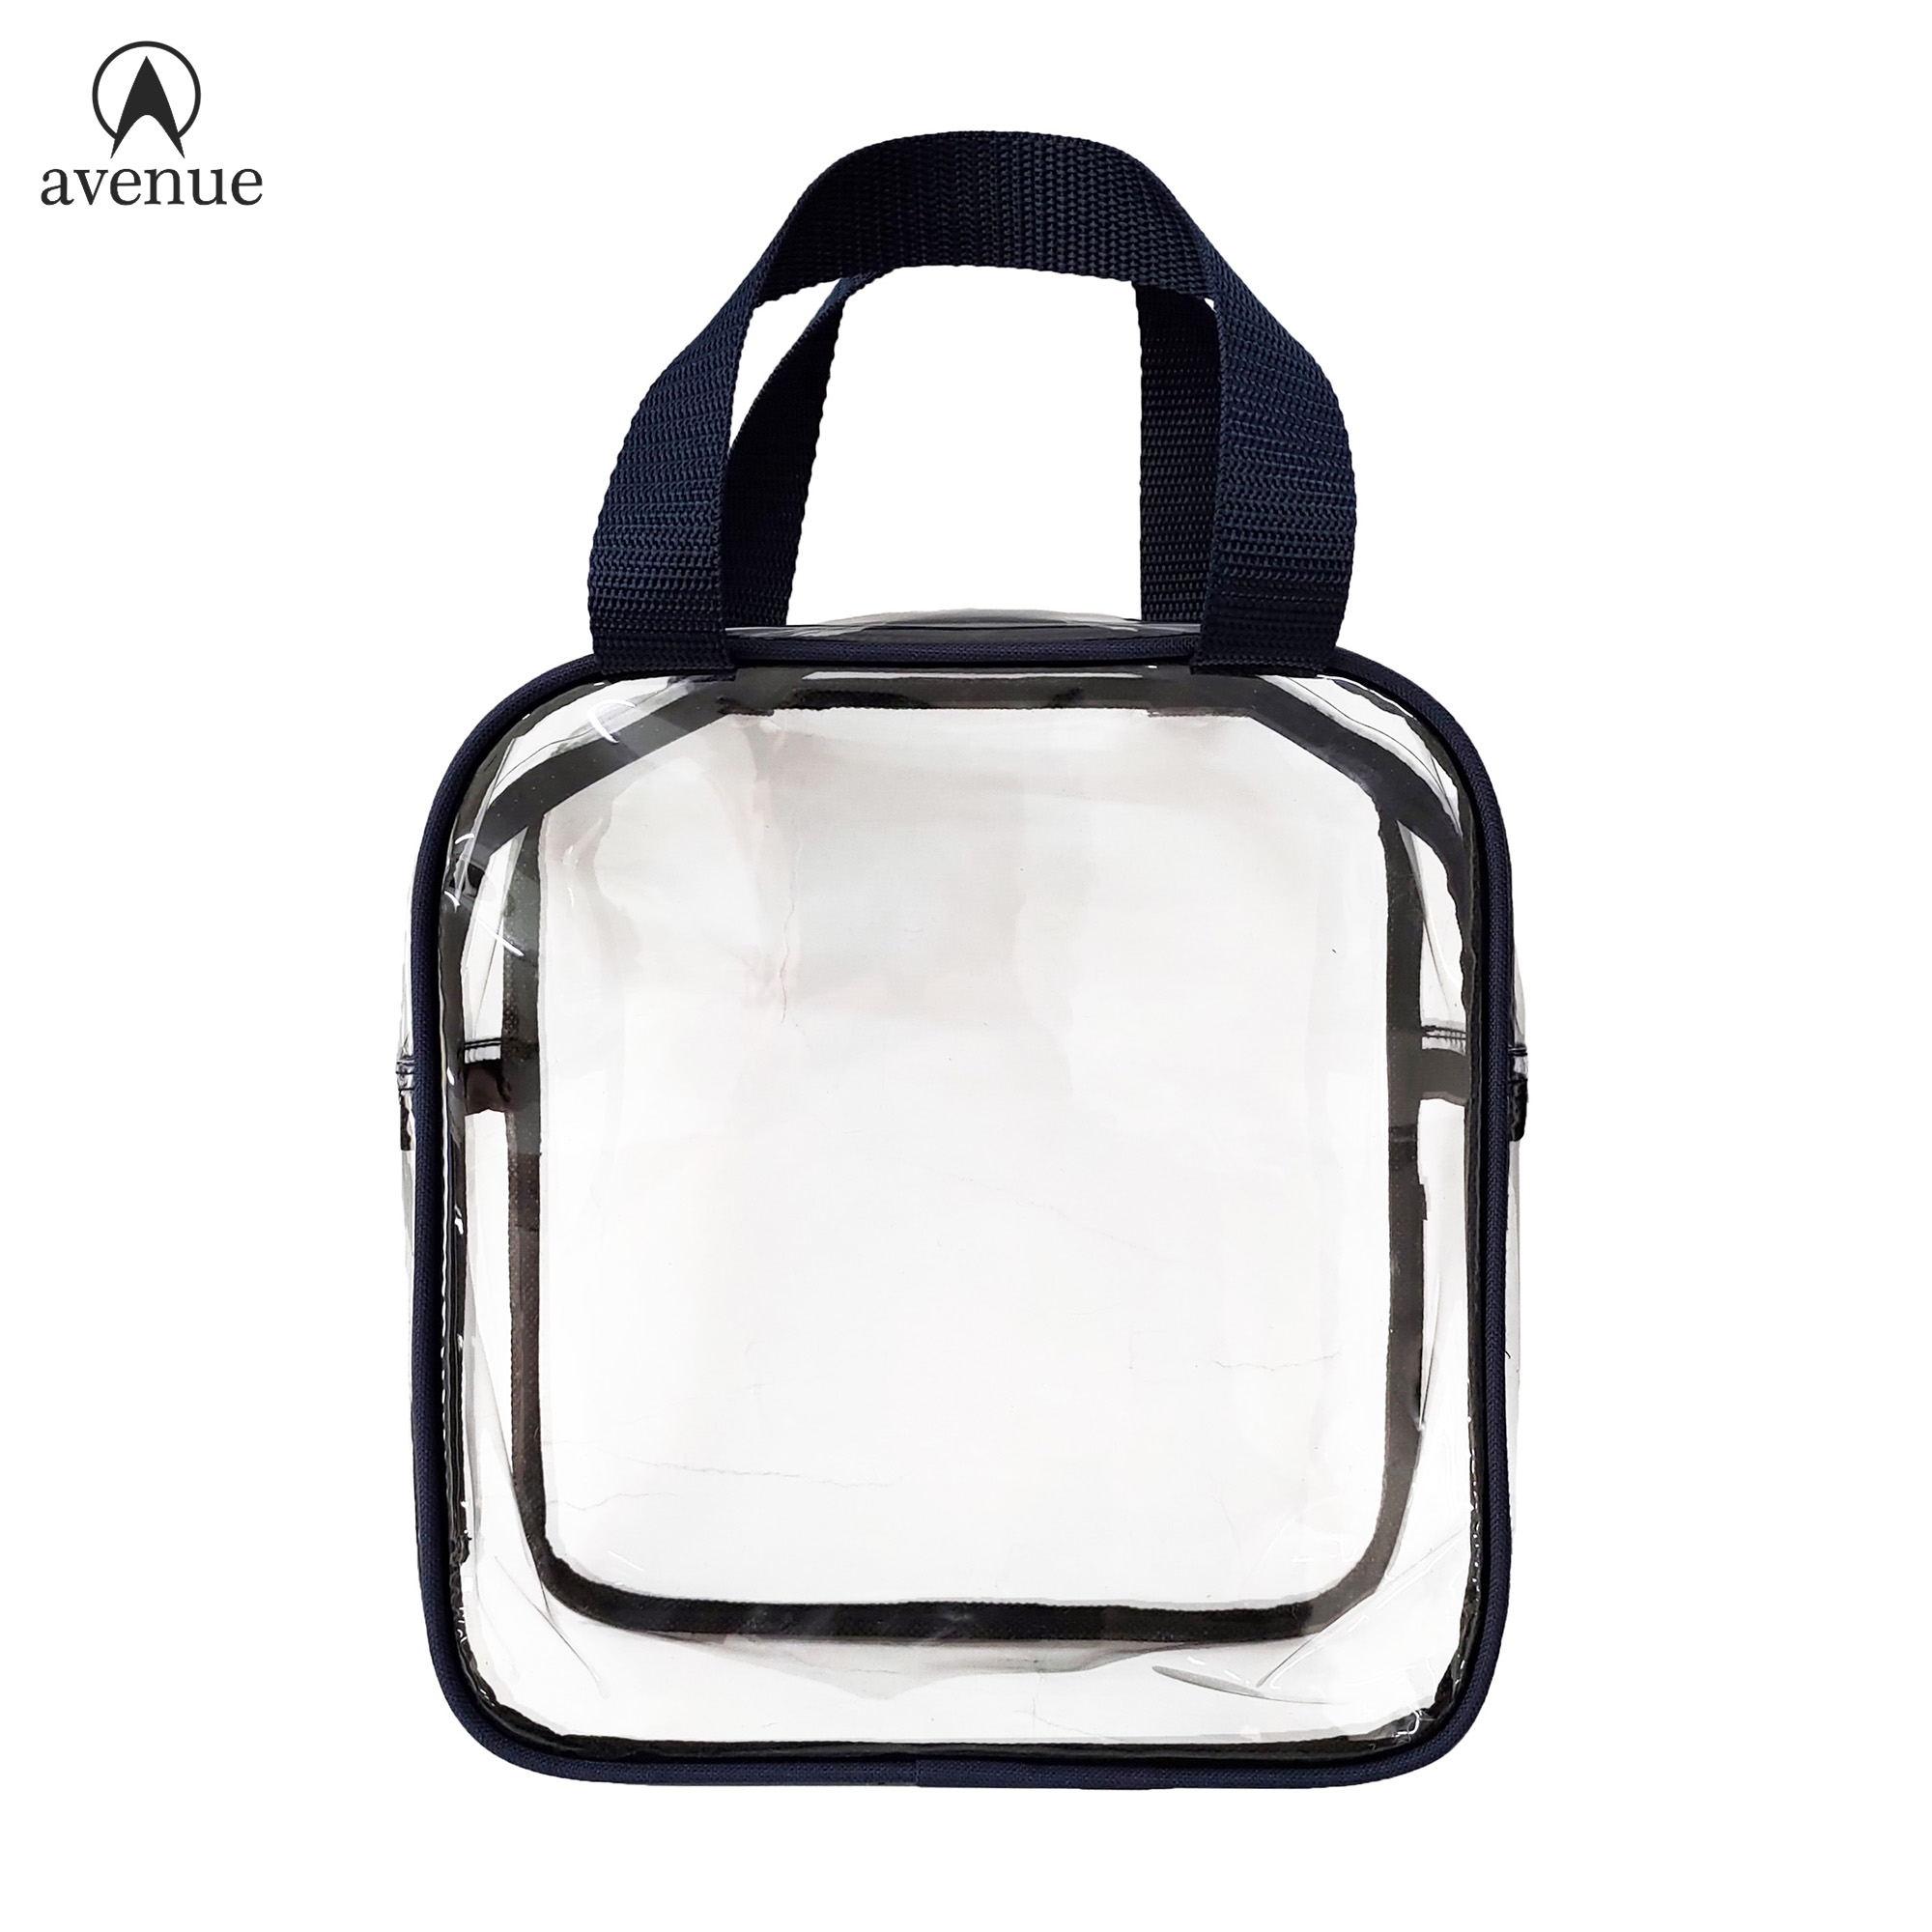 Stadium Approved Clear Tote Handbag With Handles, Large 11x4x7 Plastic Bag-vietvuevent.vn